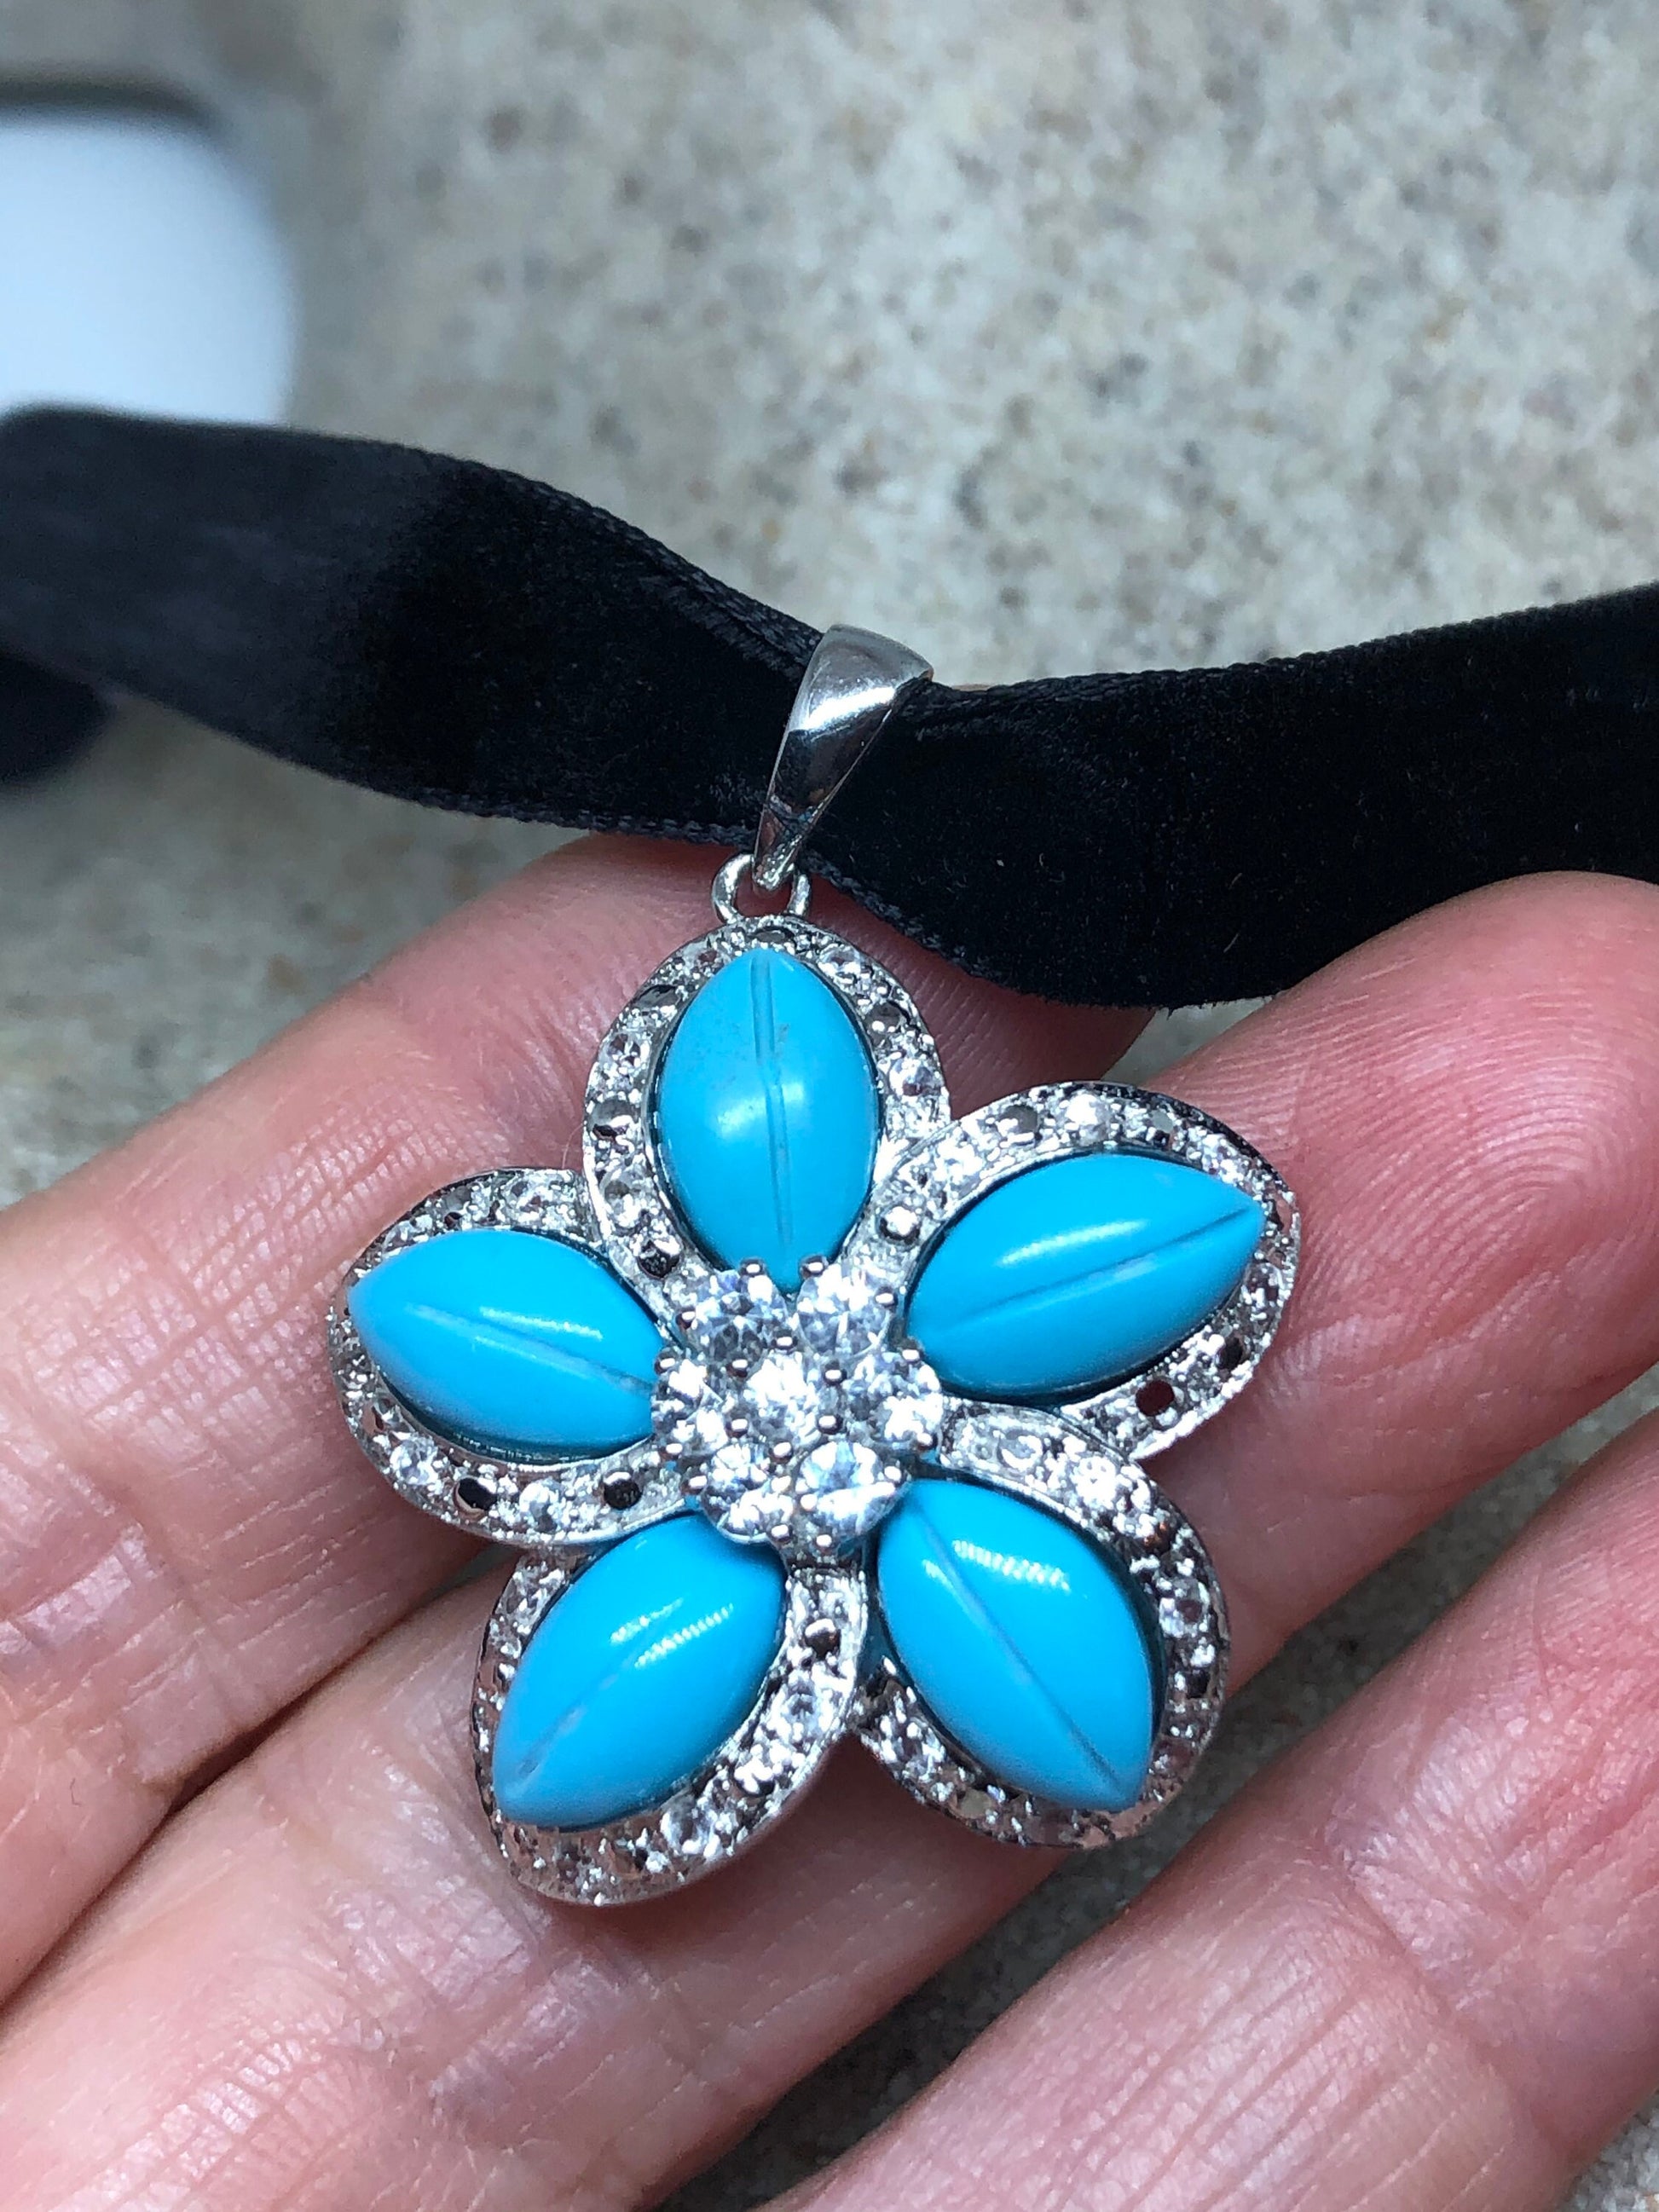 Vintage 925 Sterling Silver Persian Blue Turquoise Flower Pendant Necklace